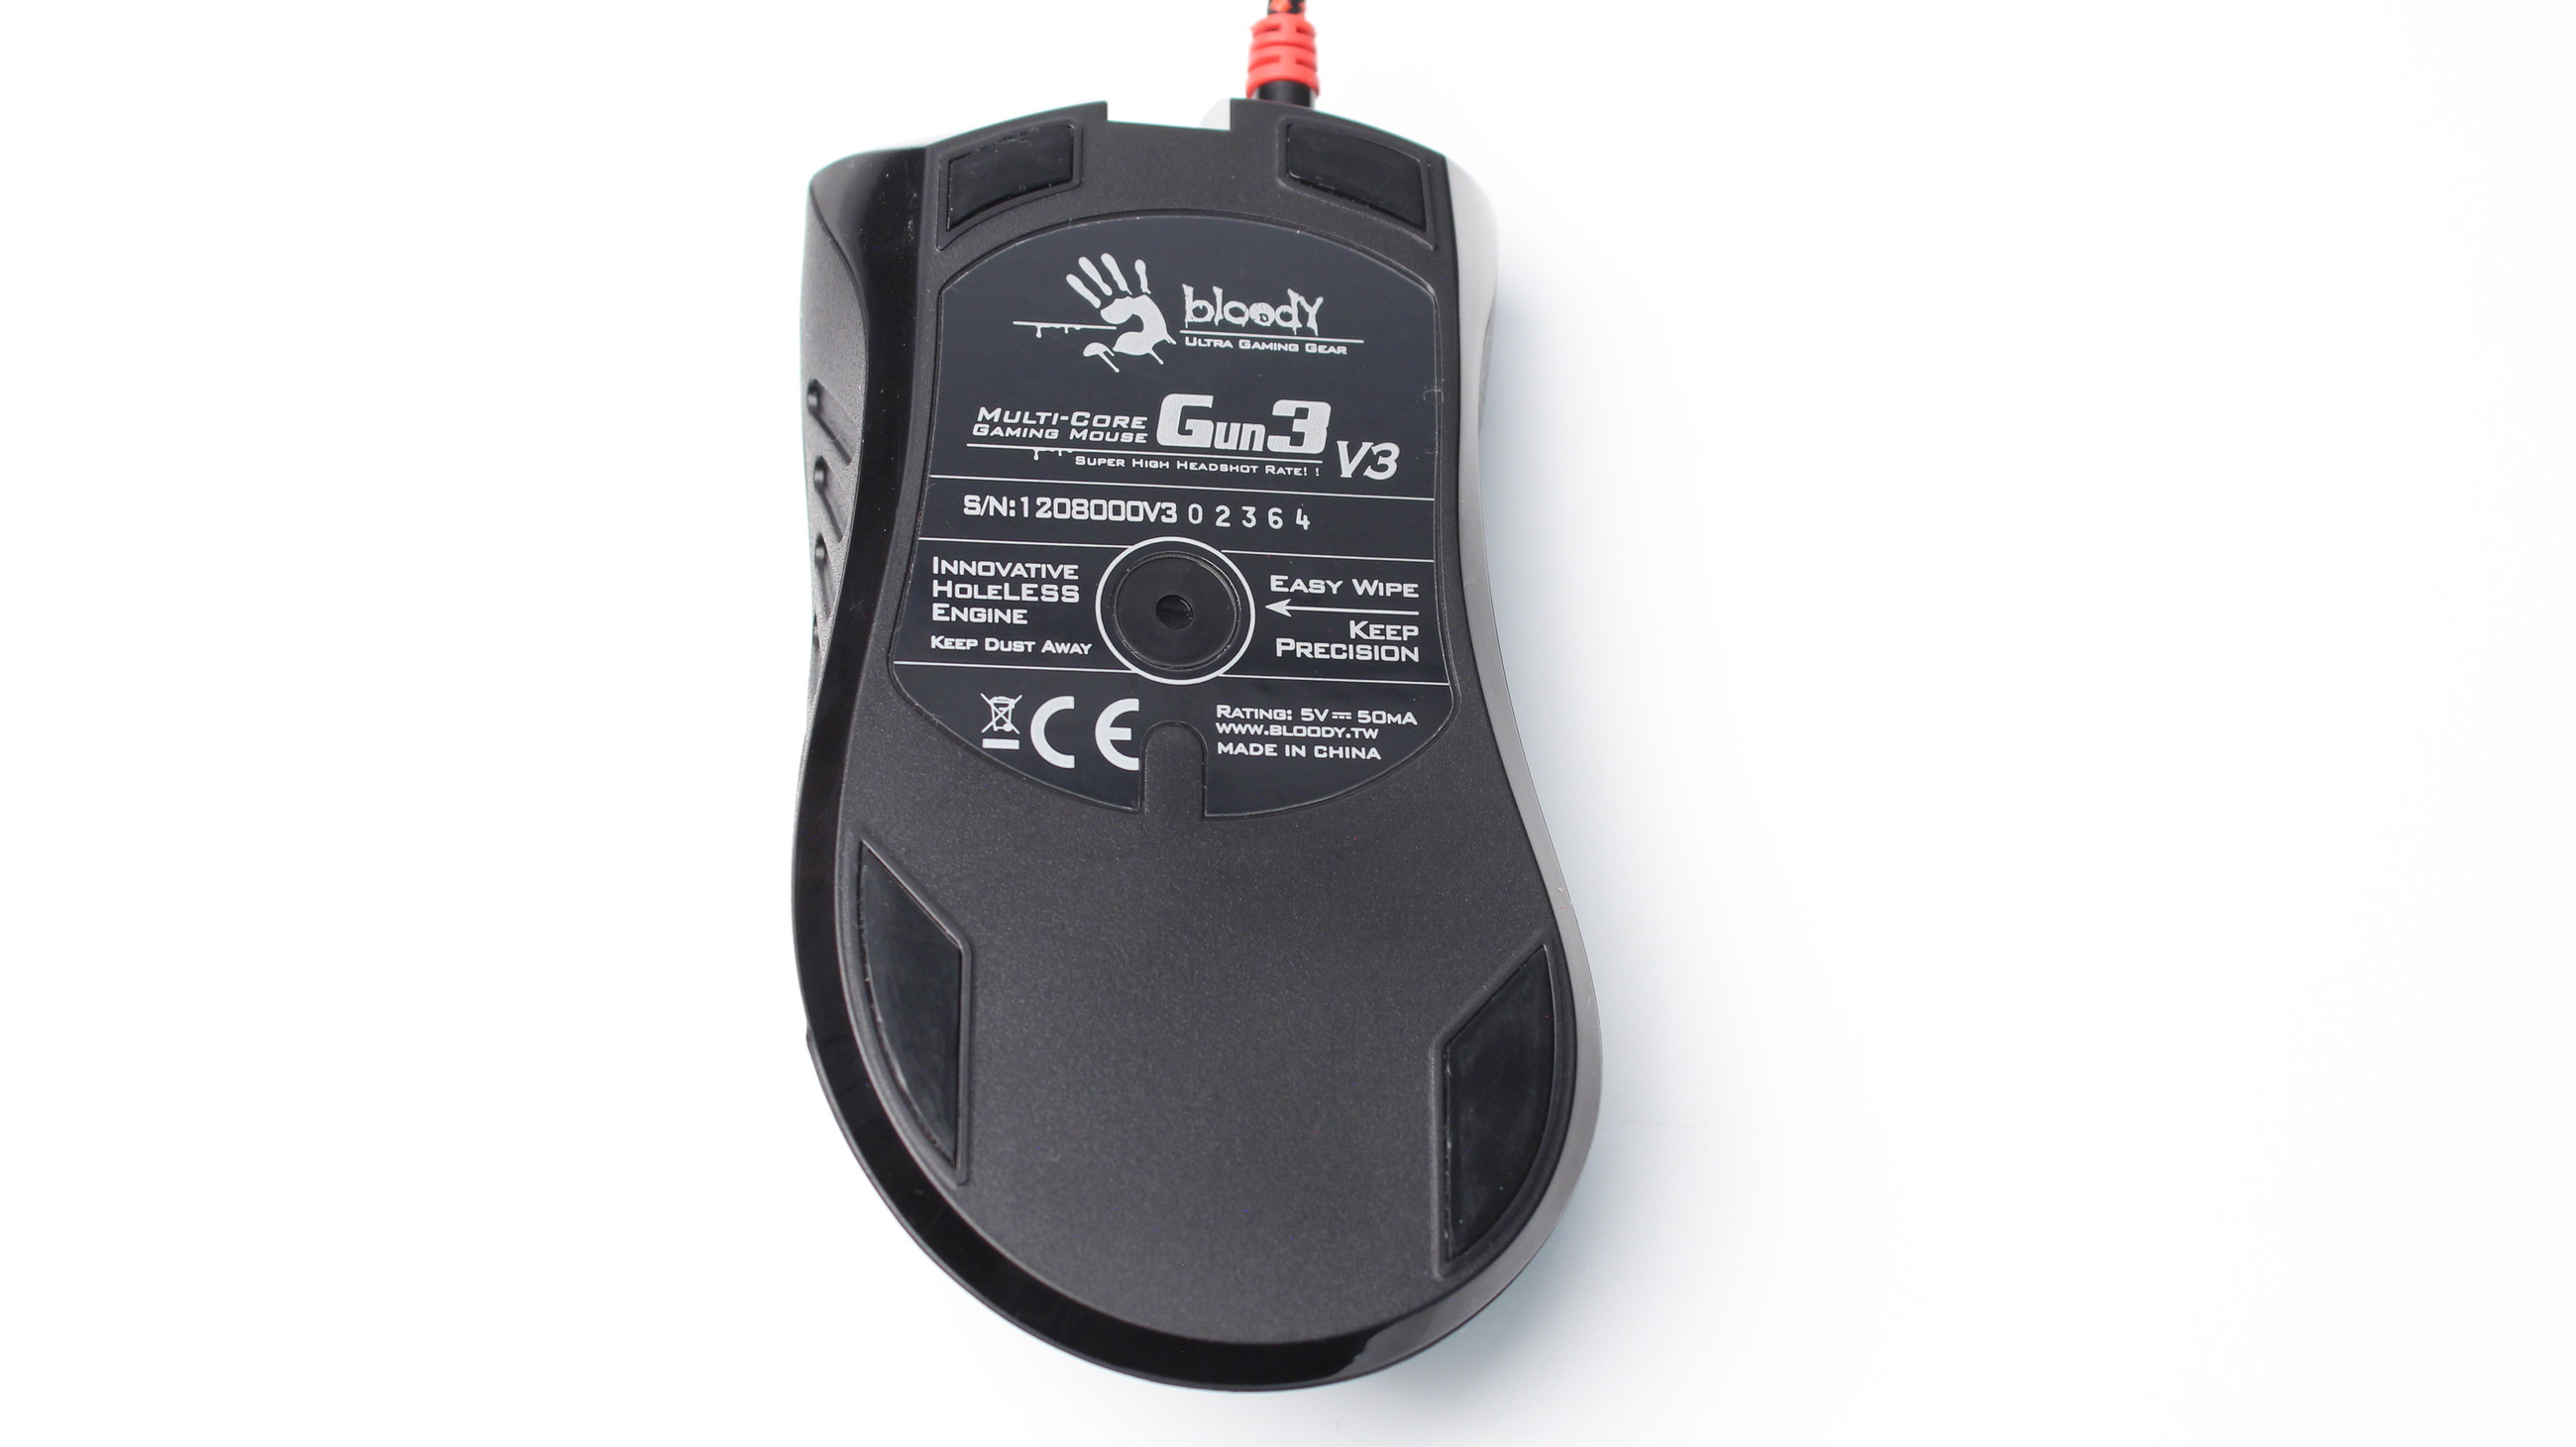 Blacklisted device bloody mouse. Bloody v3 сенсор. Блоди Ган 3. Easy wipe keep Precision на мышке что значит.